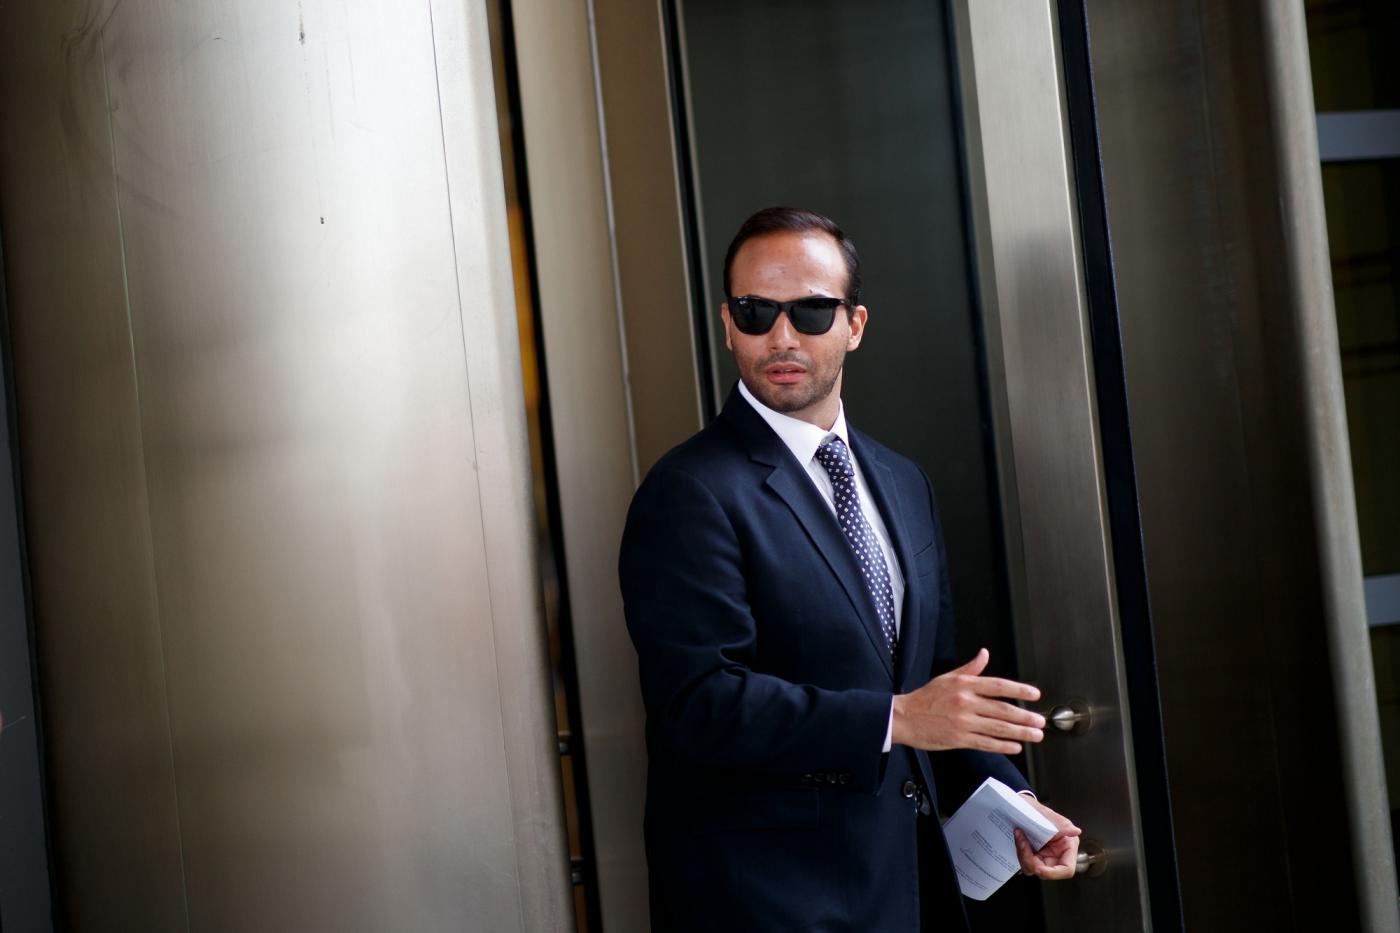 WASHINGTON, Sept. 7, 2018 (Xinhua) -- Former Trump campaign aide George Papadopoulos leaves the court in Washington D.C., the United States, on Sept. 7, 2018. George Papadopoulos was sentenced Friday to 14 days in prison for lying to federal investigators during the Russia probe. (Xinhua/Ting Shen/IANS) by .